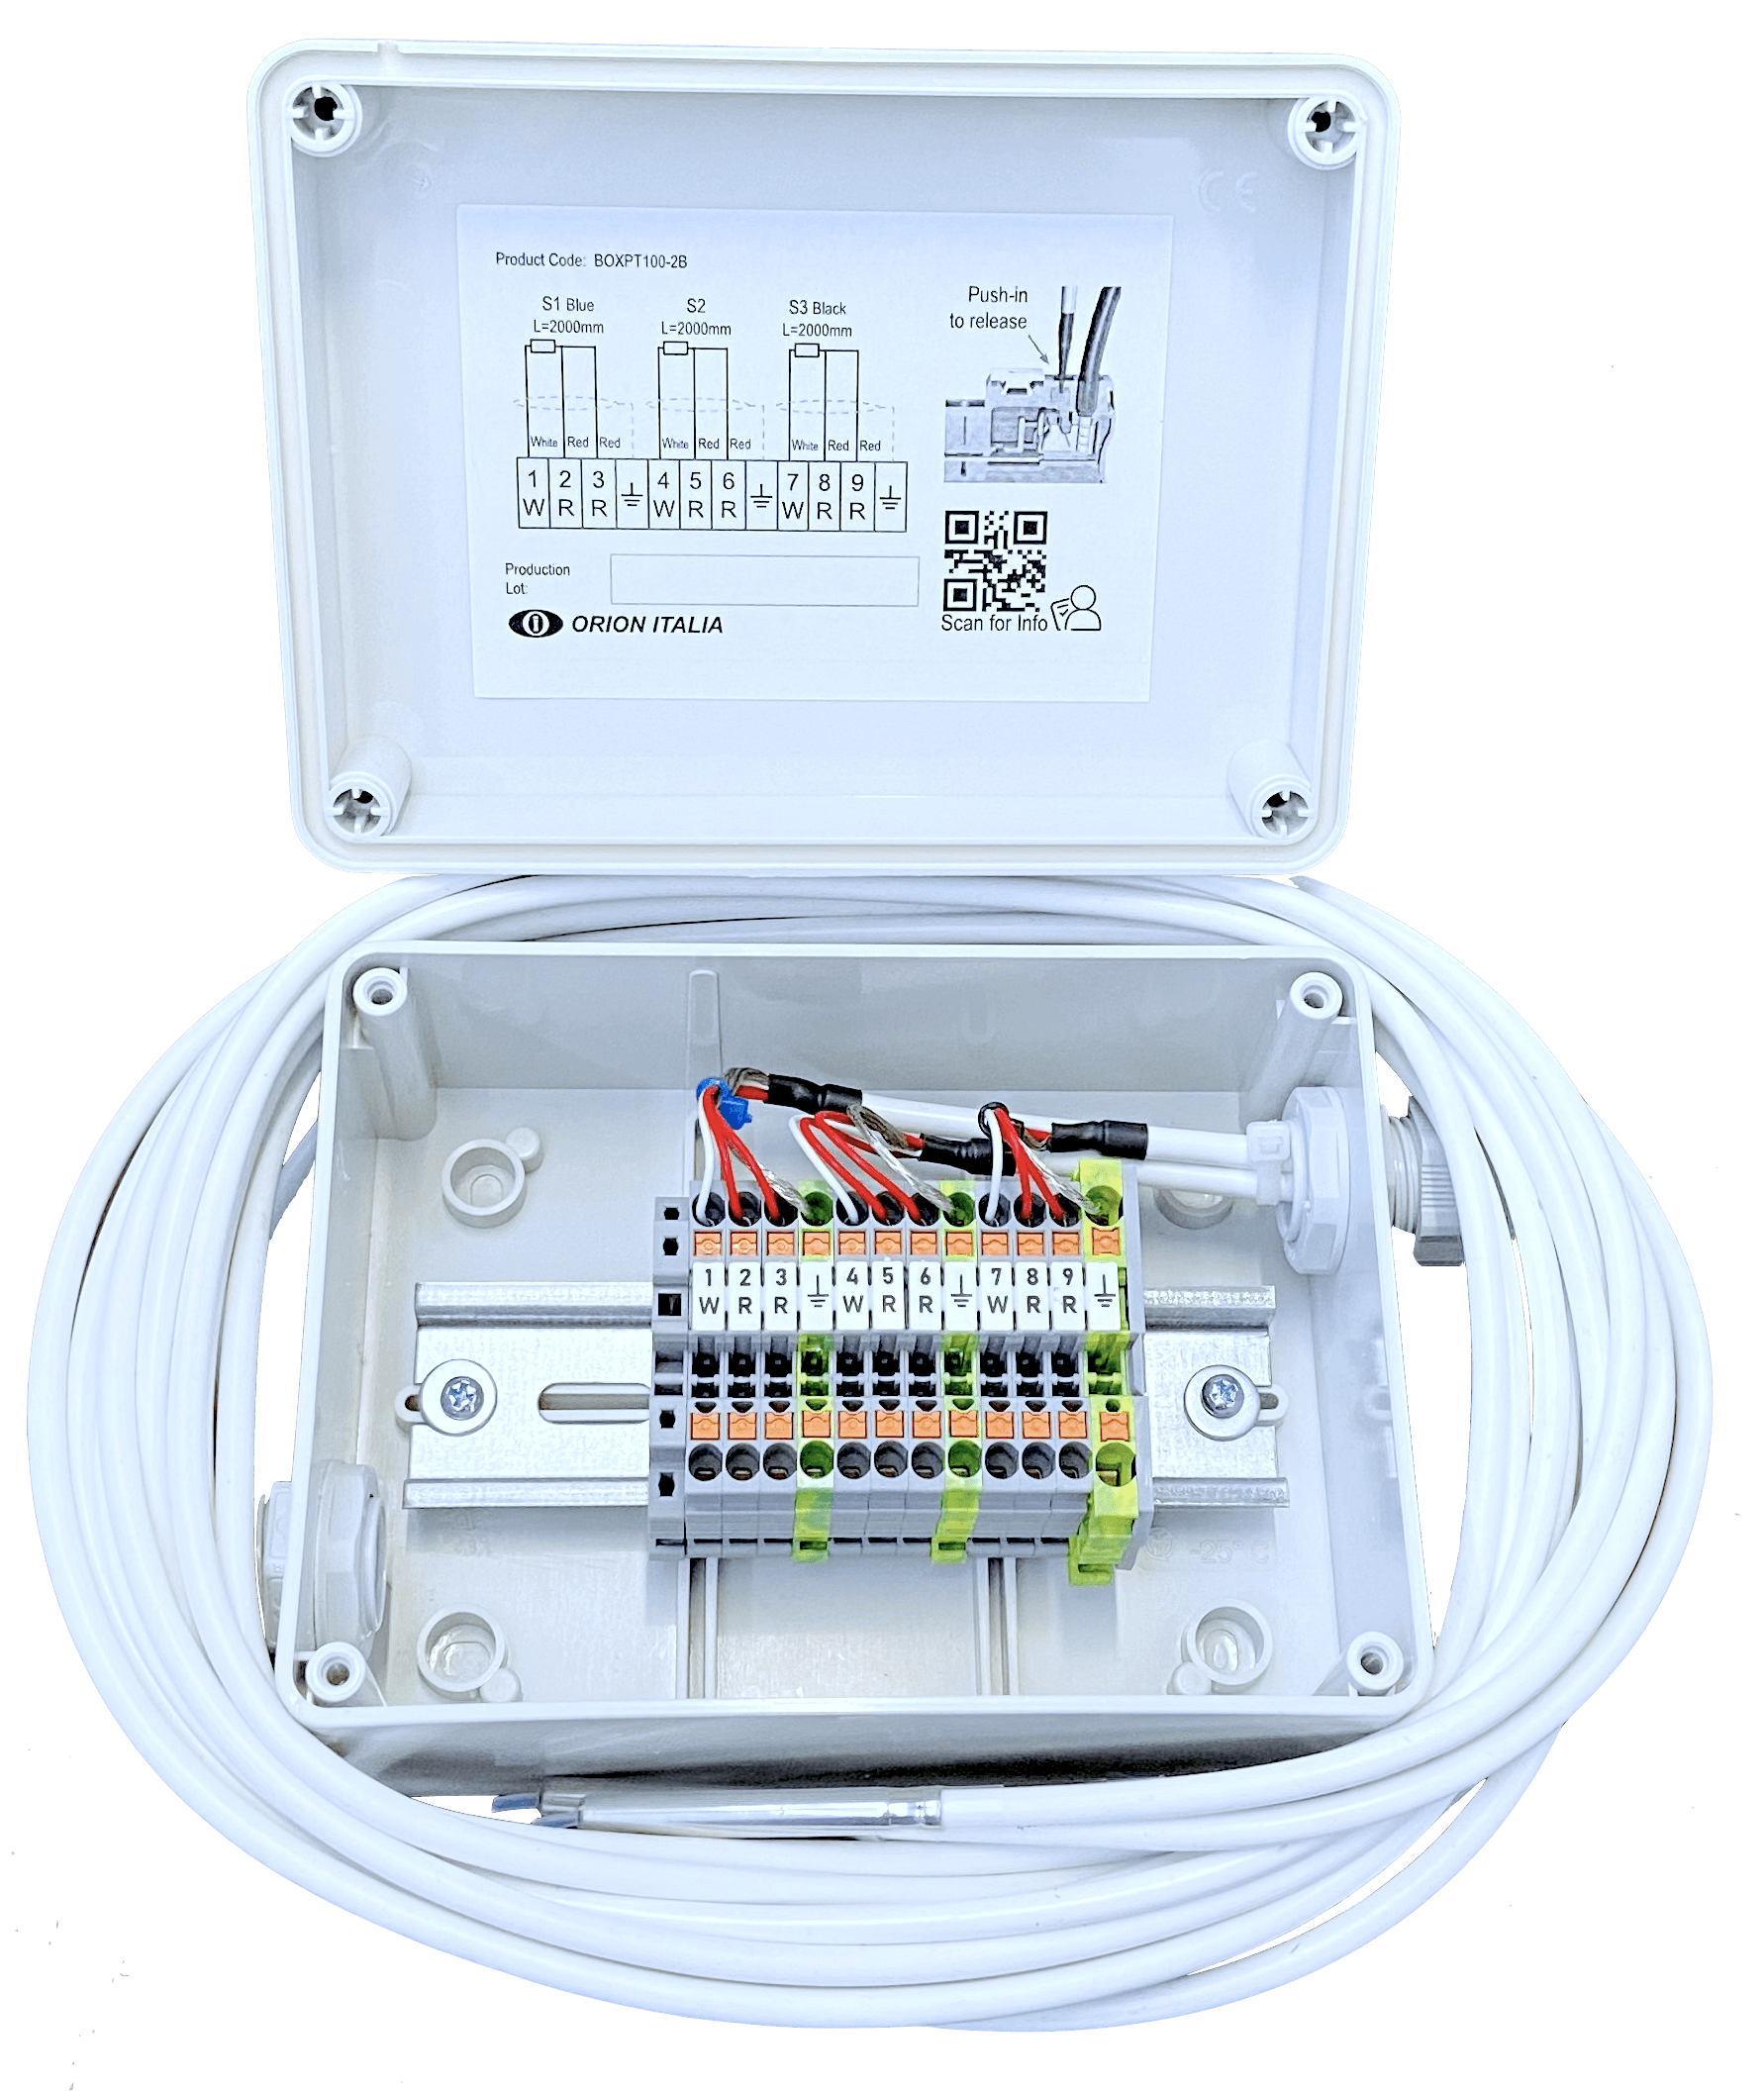 PT100 junction box for temperature reading